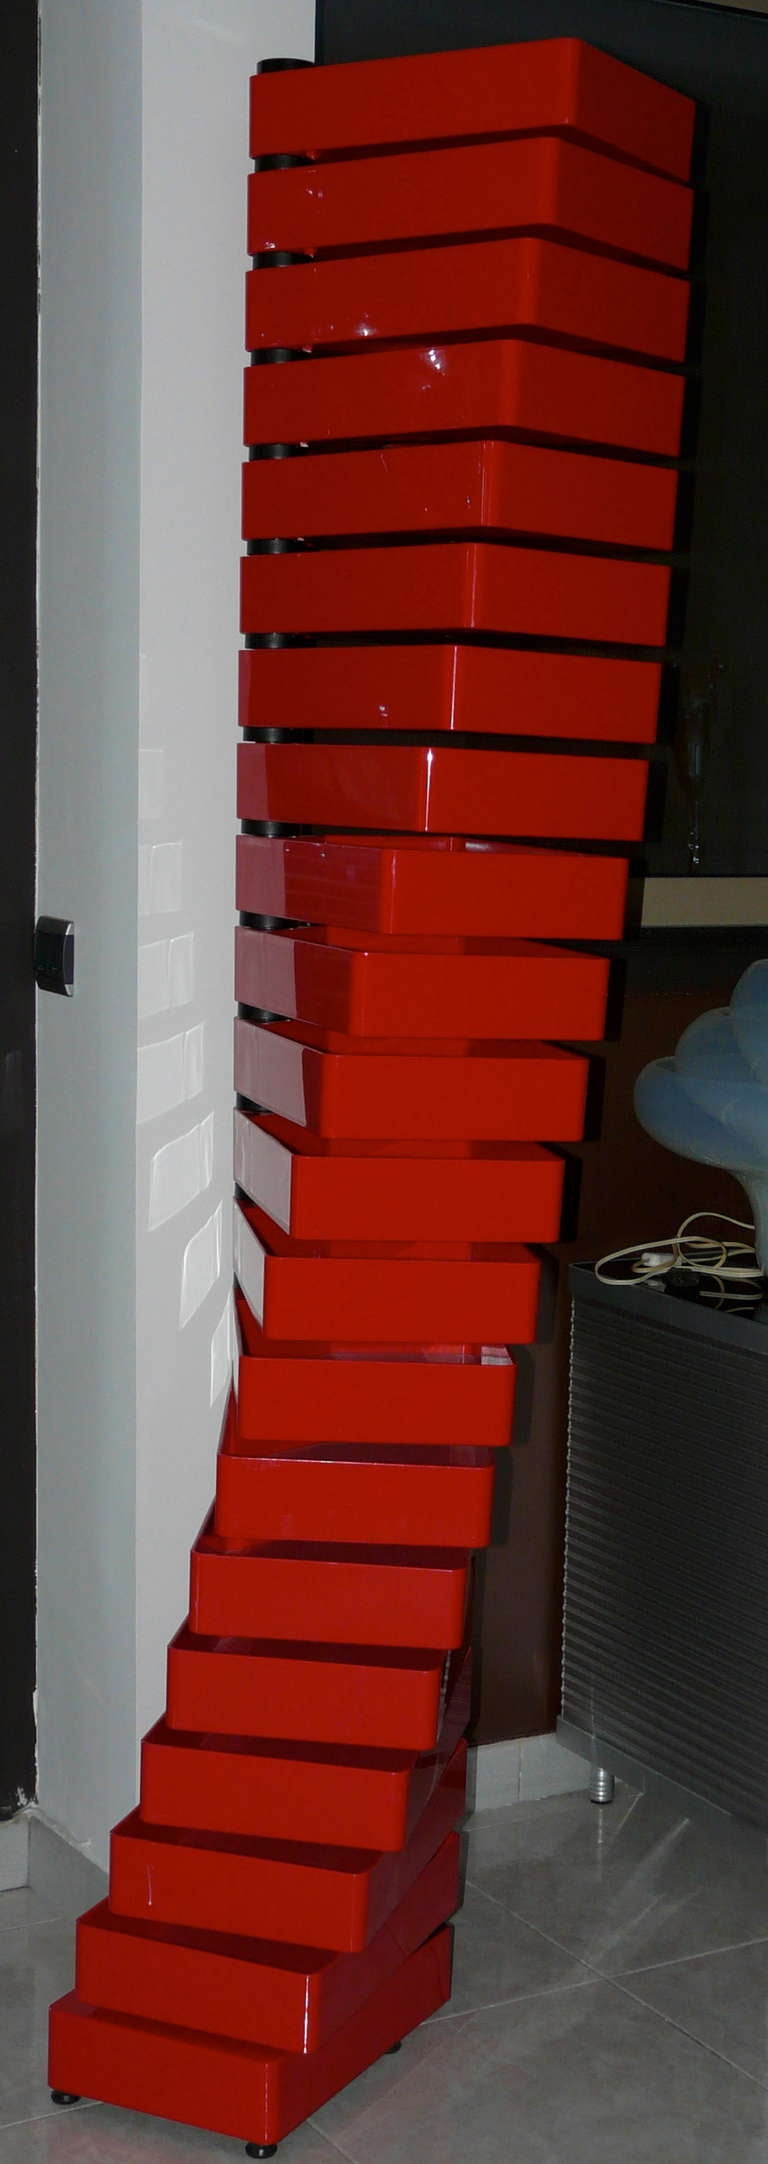 Chest of drawers with 20 drawers in red polish acrilyc material, revolving round a vertical metal support.